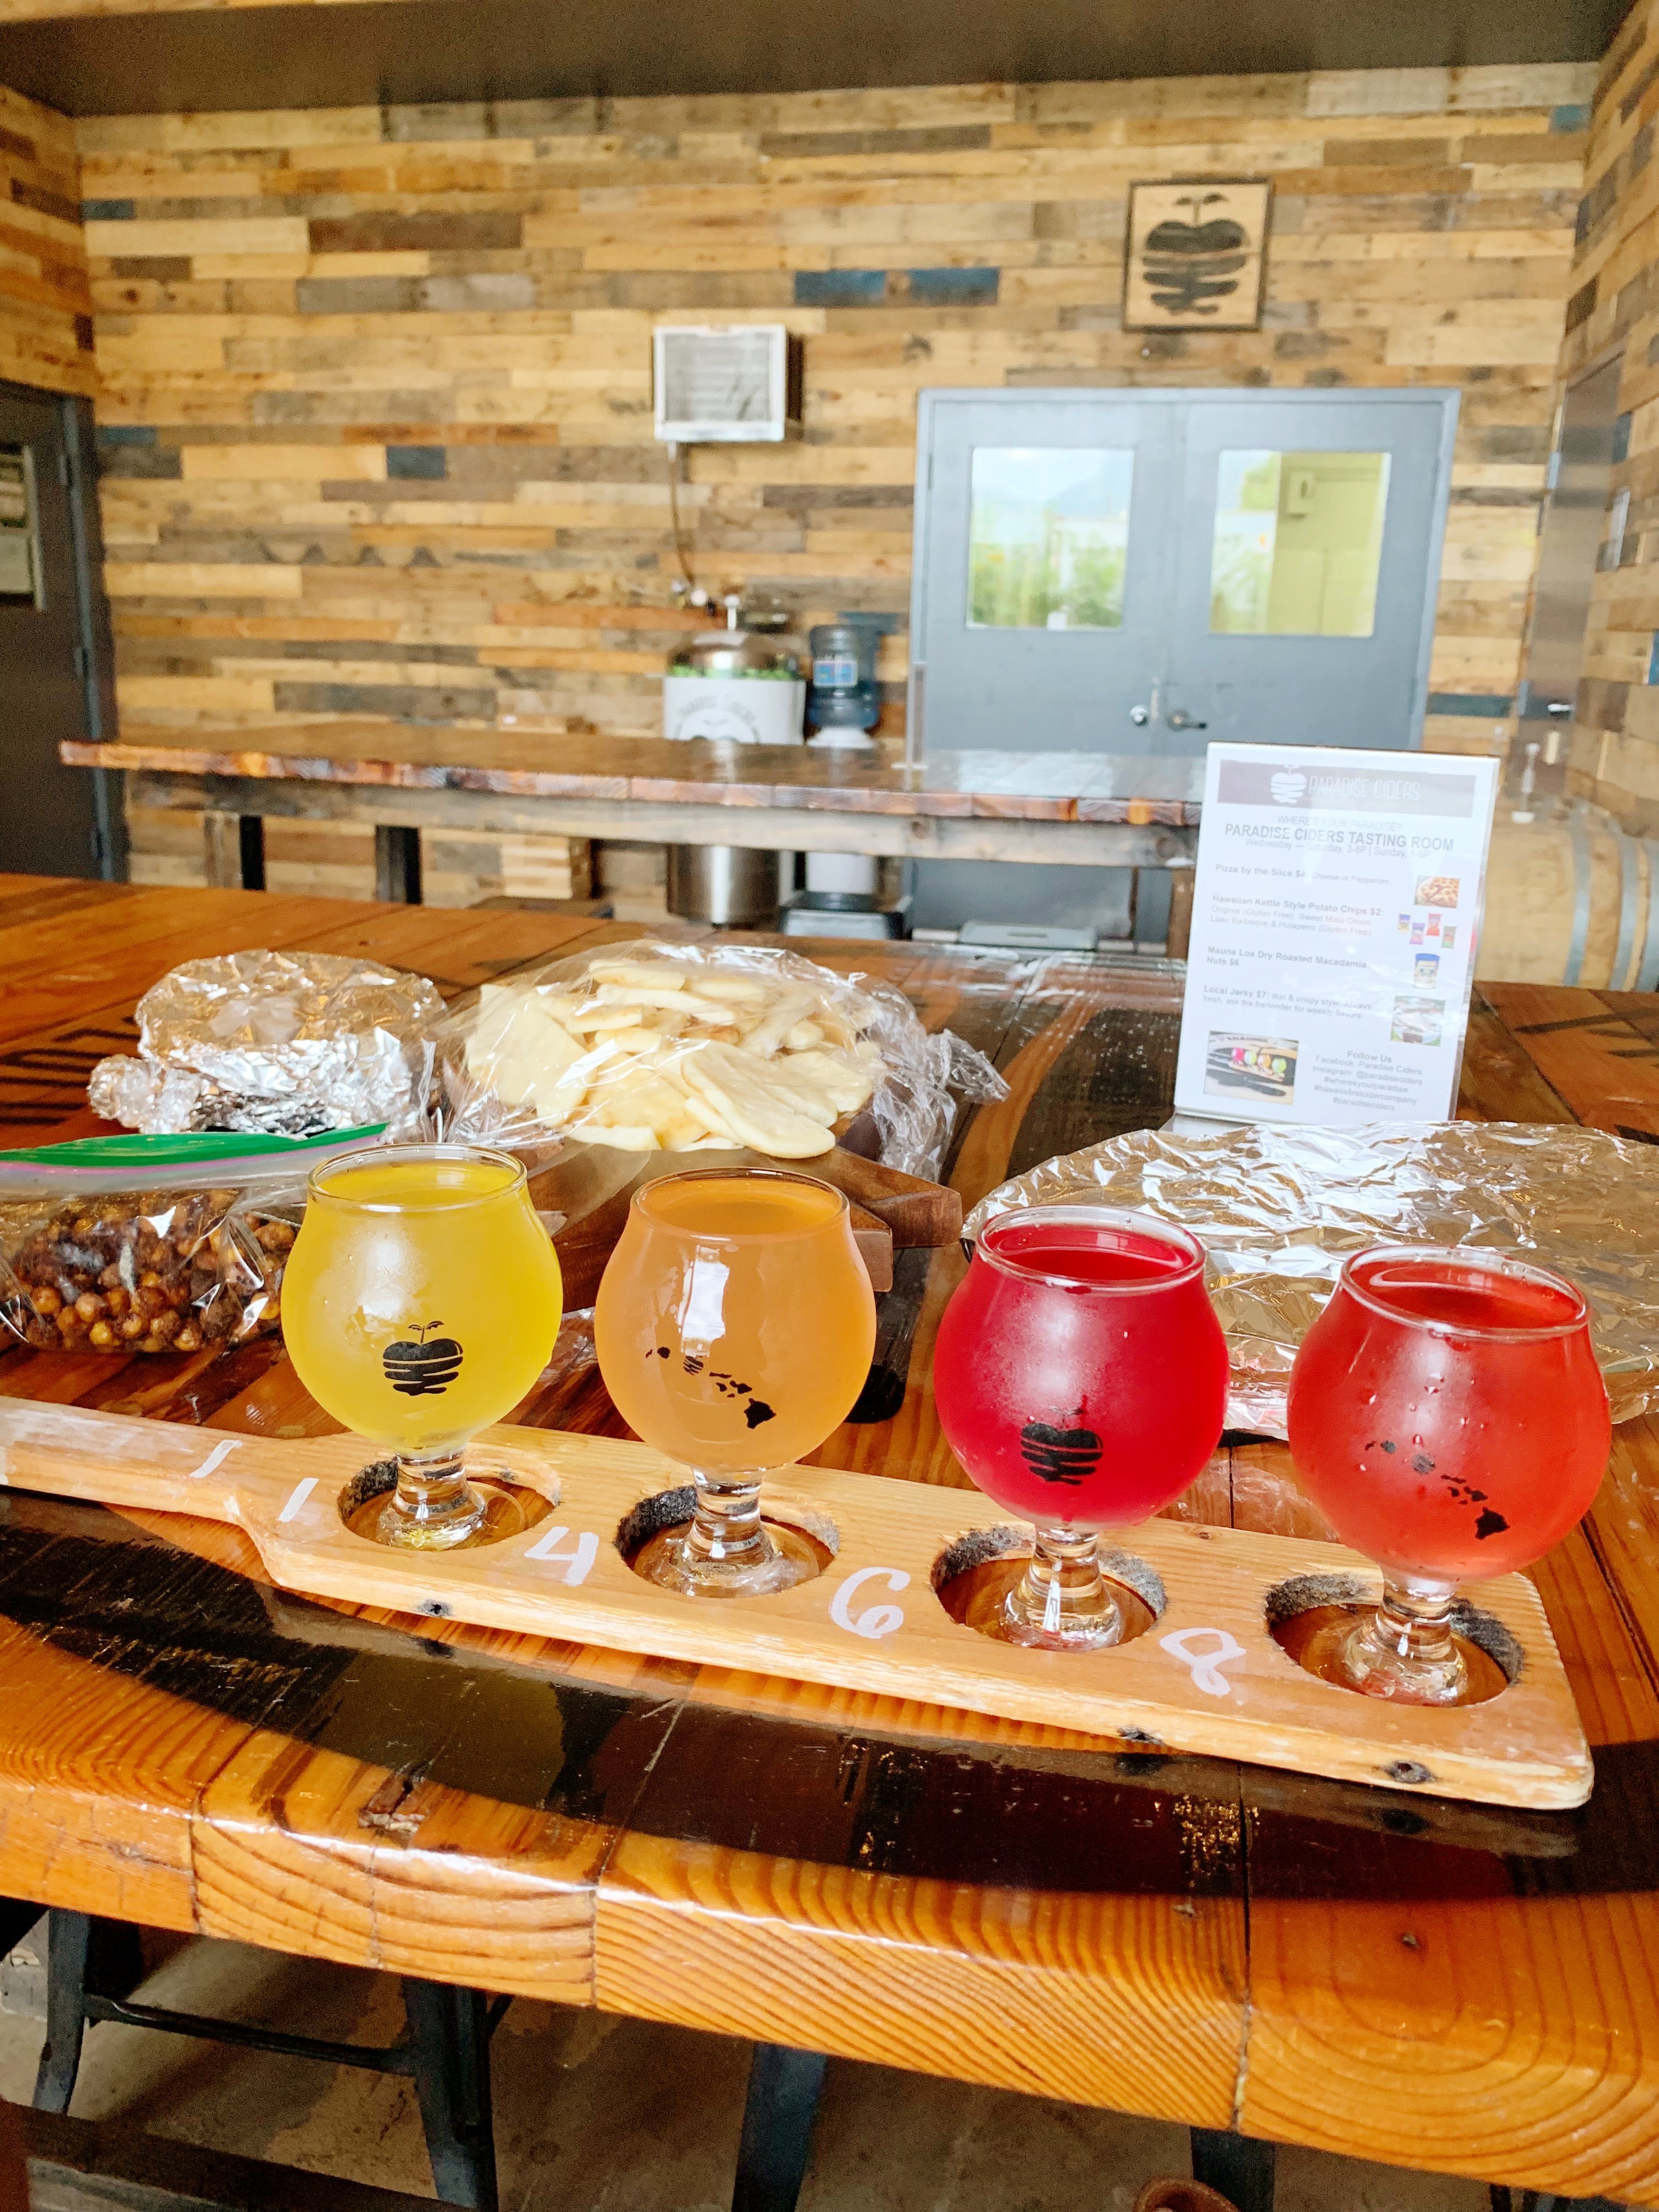 Visiting Paradise Ciders - Hawaii's First Cider Company - Oahu Hawaii Cider - Breweries and Distilleries in Hawaii - Hard Cider Hawaii - What to do on Oahu